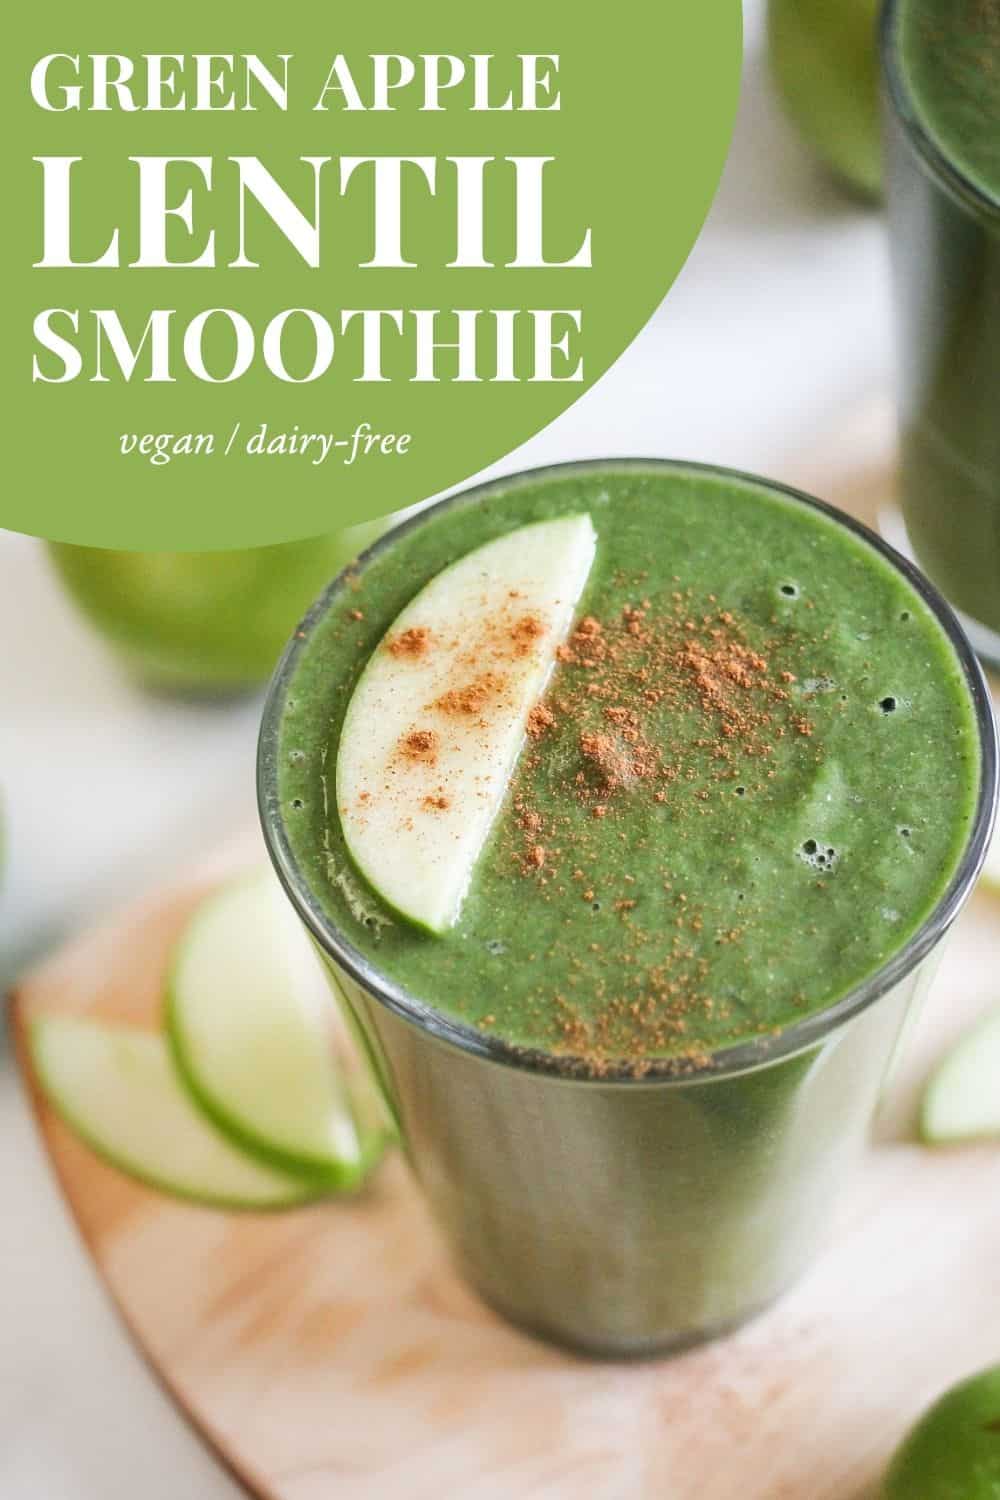 Green smoothie topped with cinnamon and apple slice with green and white text reading, "Green Apple Lentil Smoothie: vegan, dairy-free."